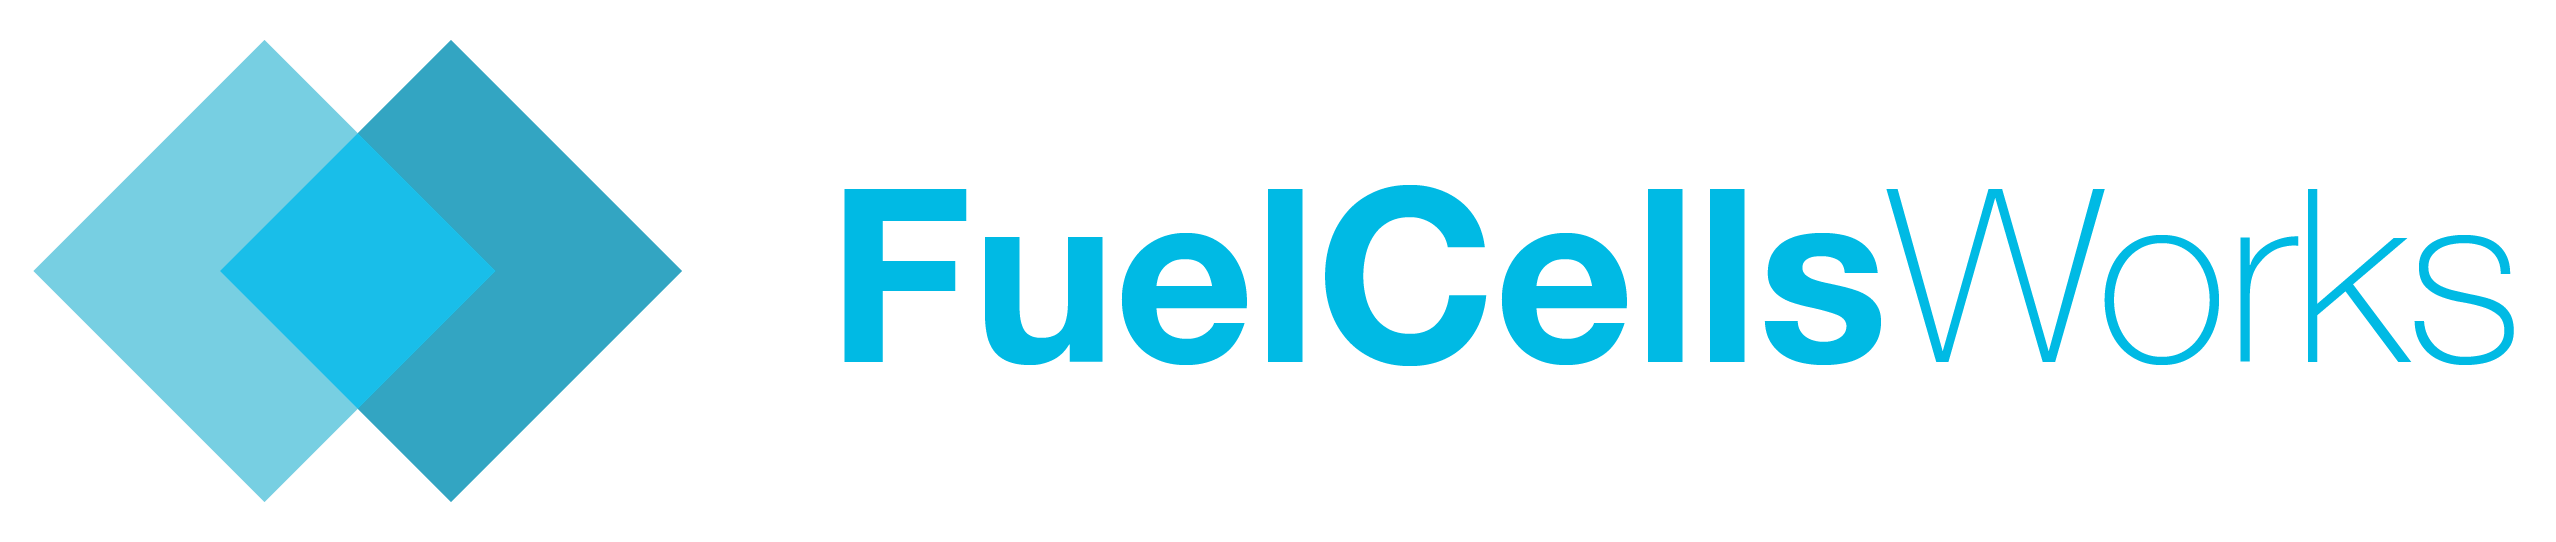 FuelCell Works Logo